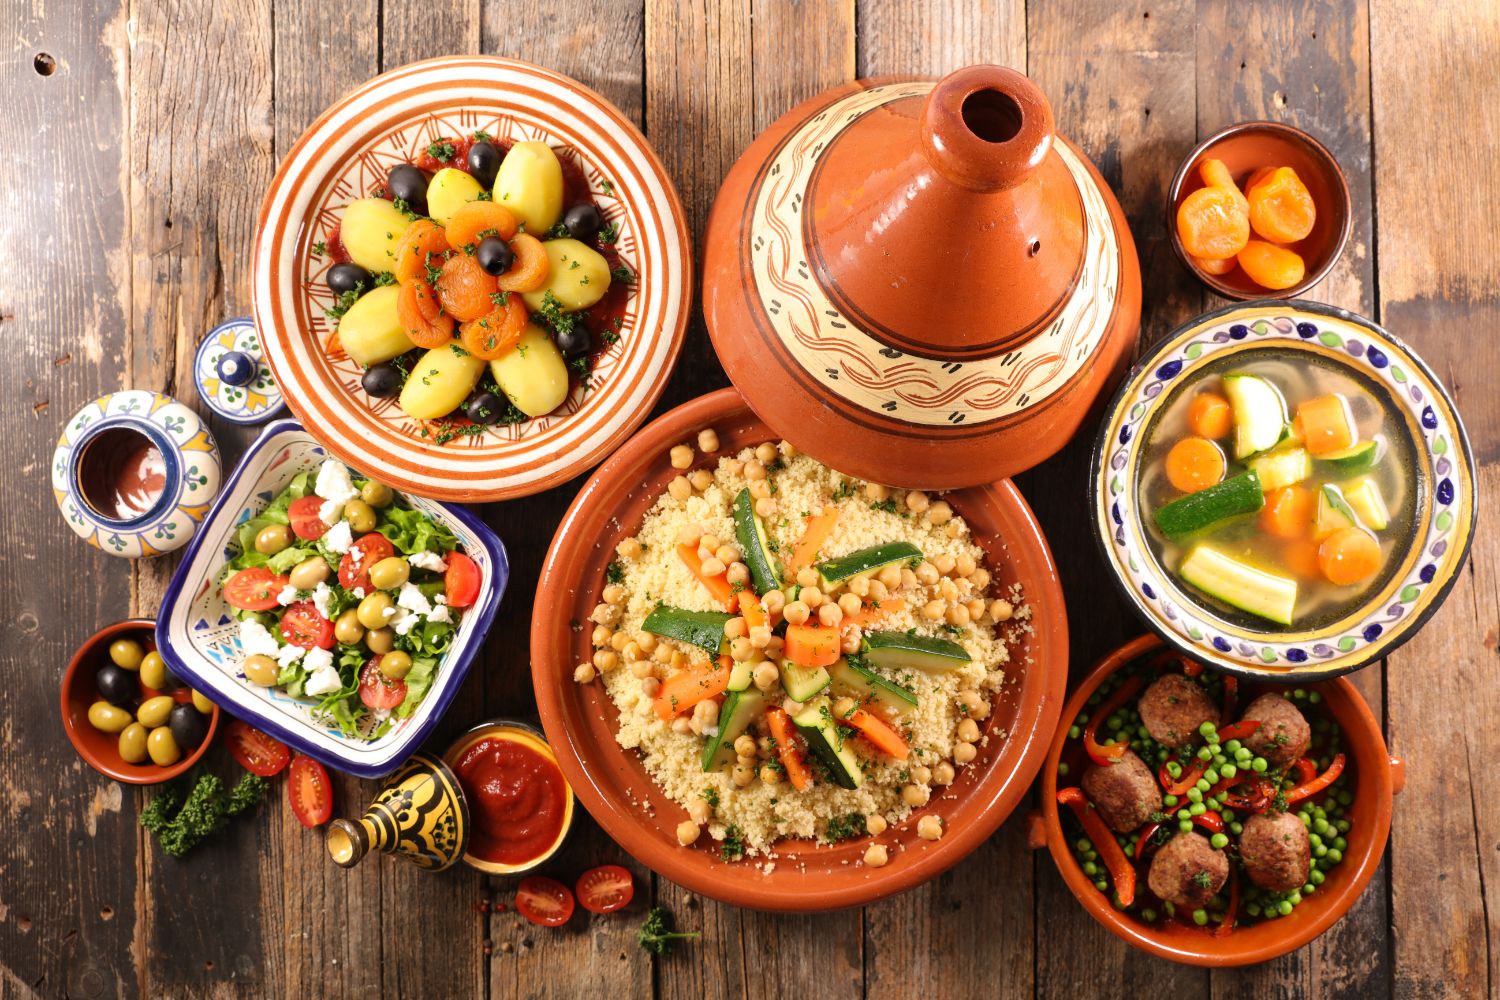 Food from Around the World Food from Morocco